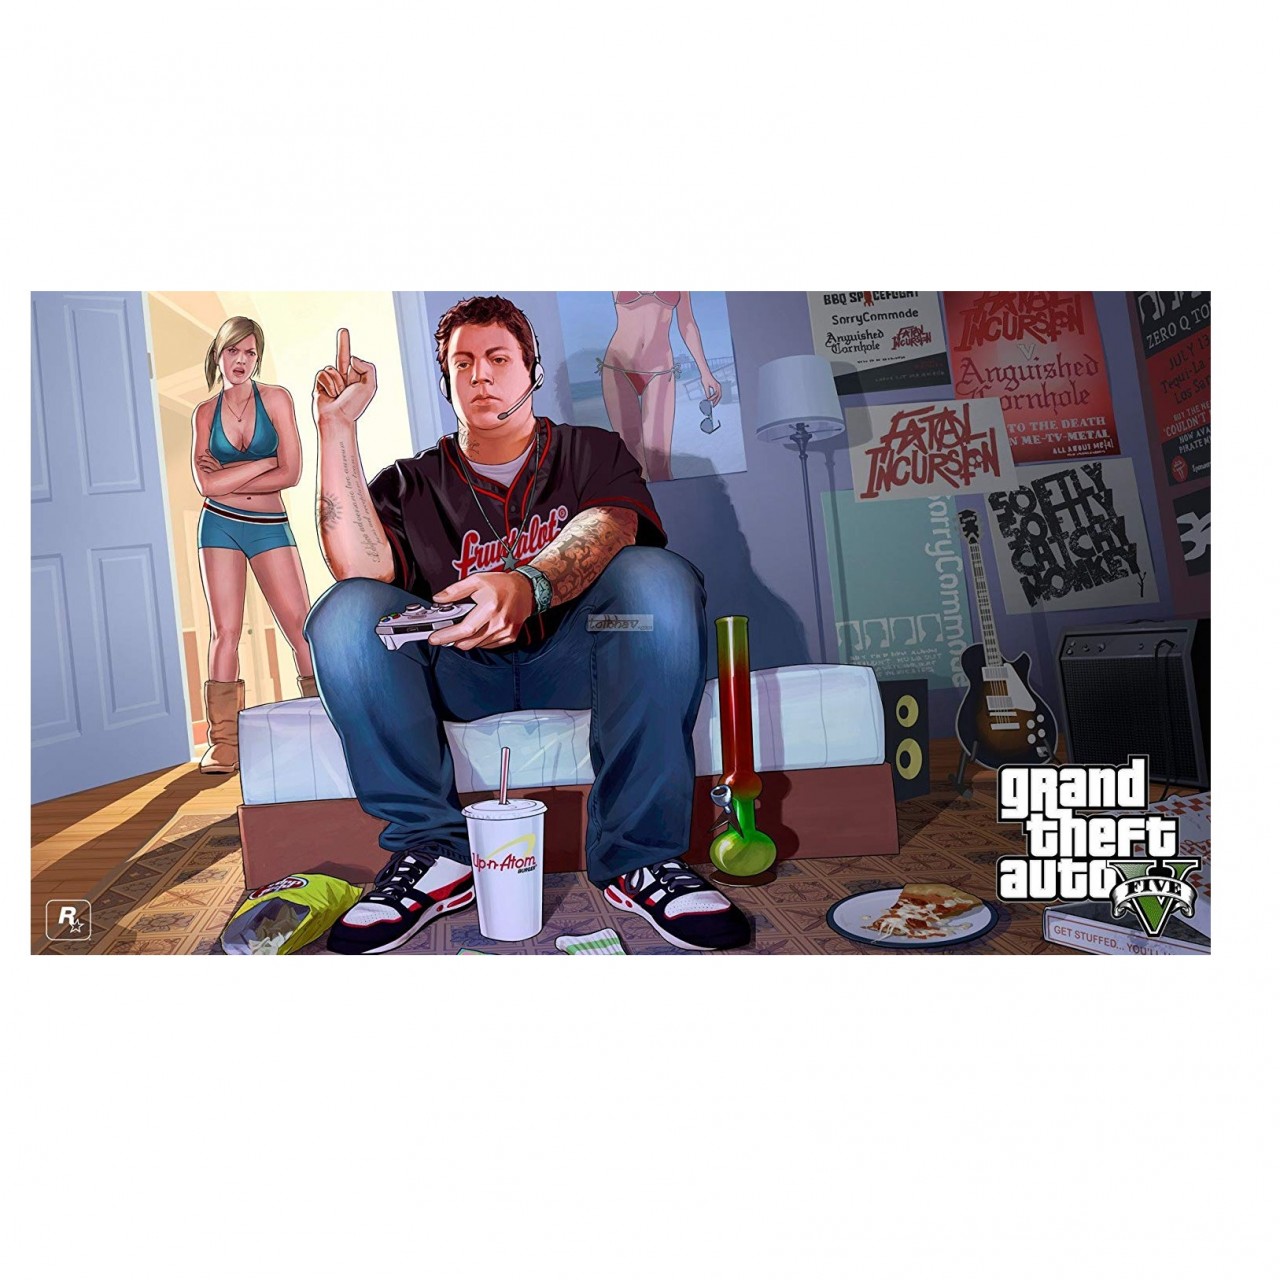 18. Grand Theft Auto V – Play Station 3 – Up to 3 Years Product Age